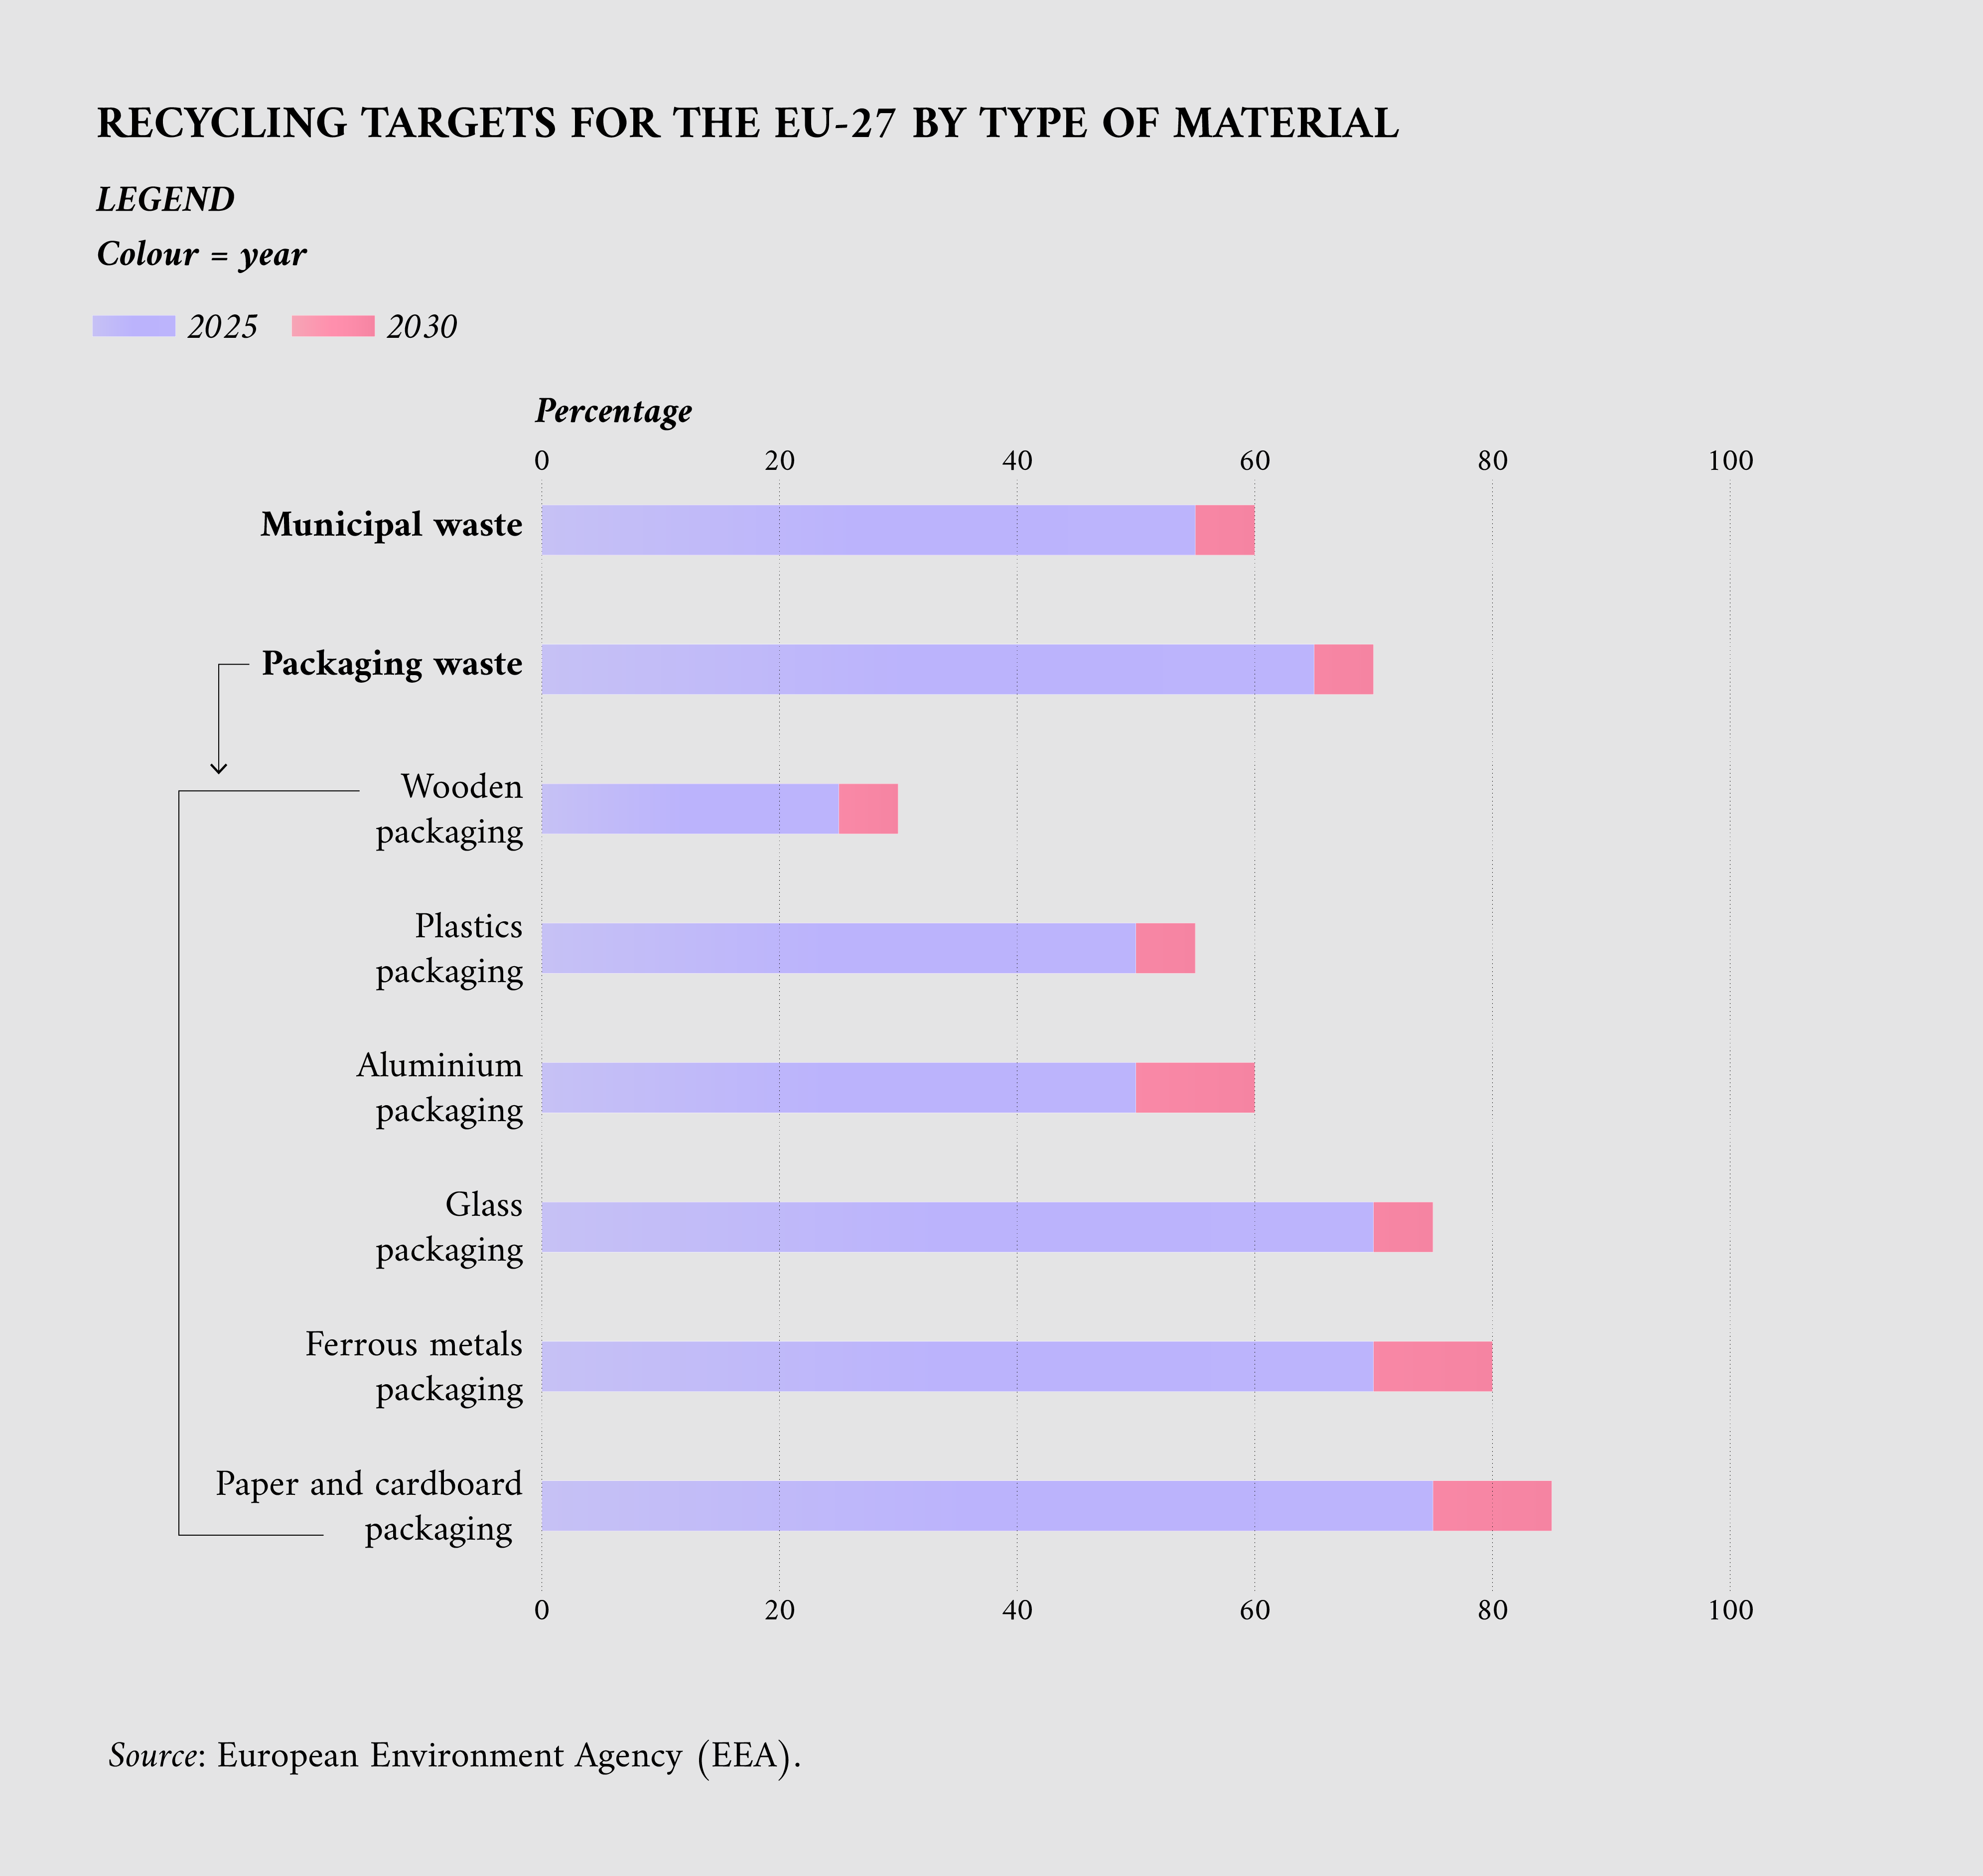 Recycling targets for the EU-27 by type of material.